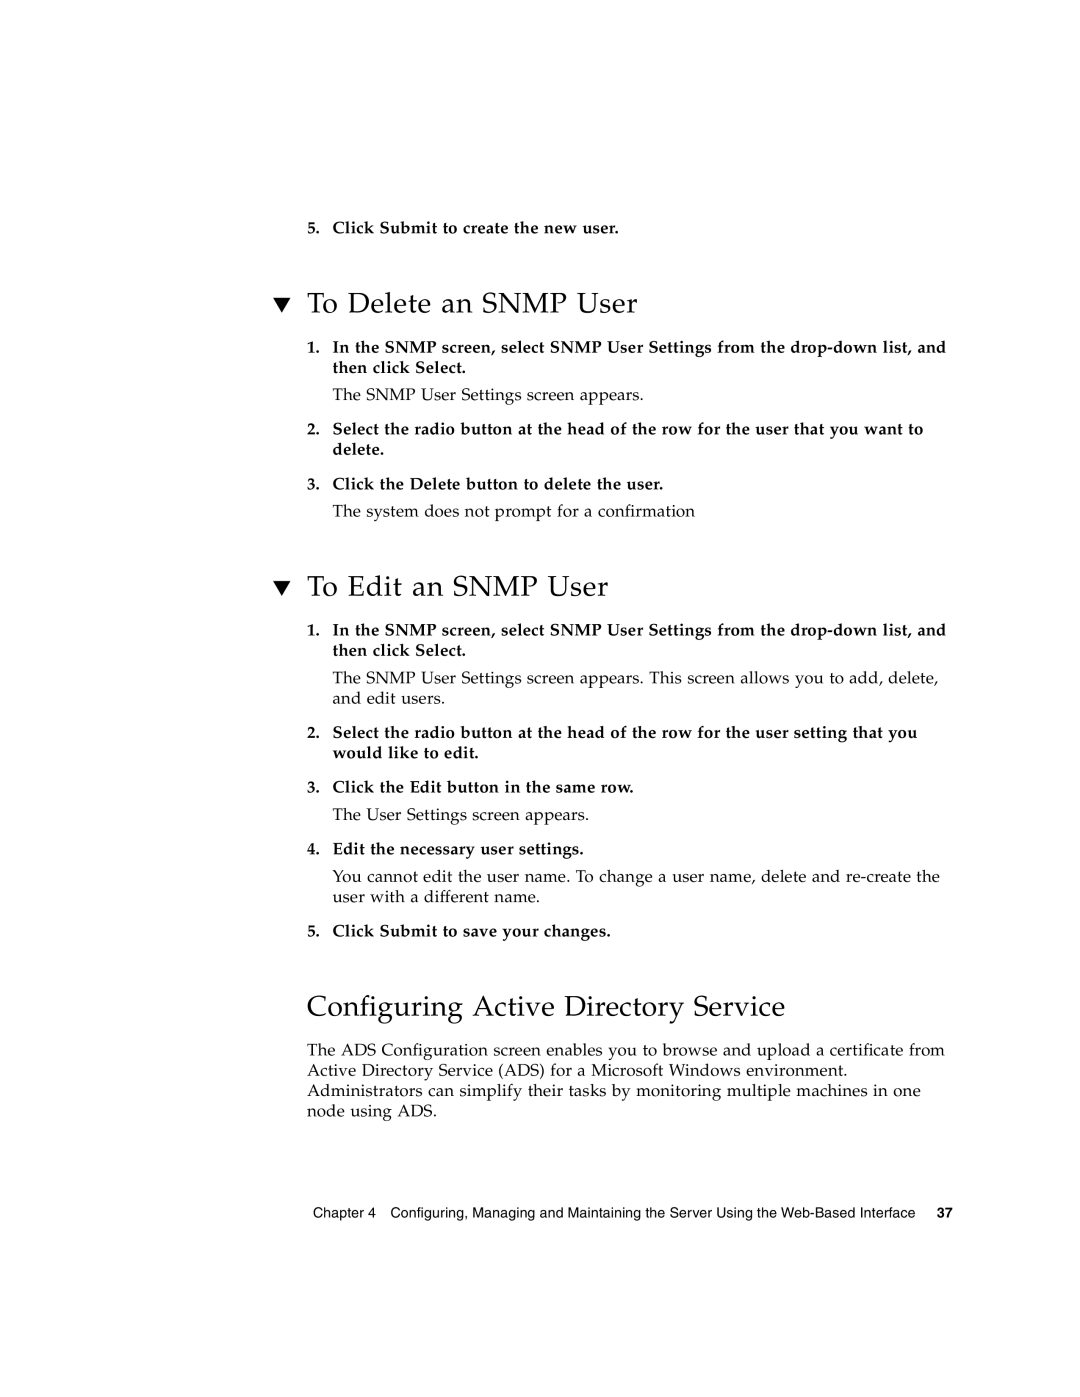 Sun Microsystems X4150 manual To Delete an SNMP User, To Edit an SNMP User, Configuring Active Directory Service 